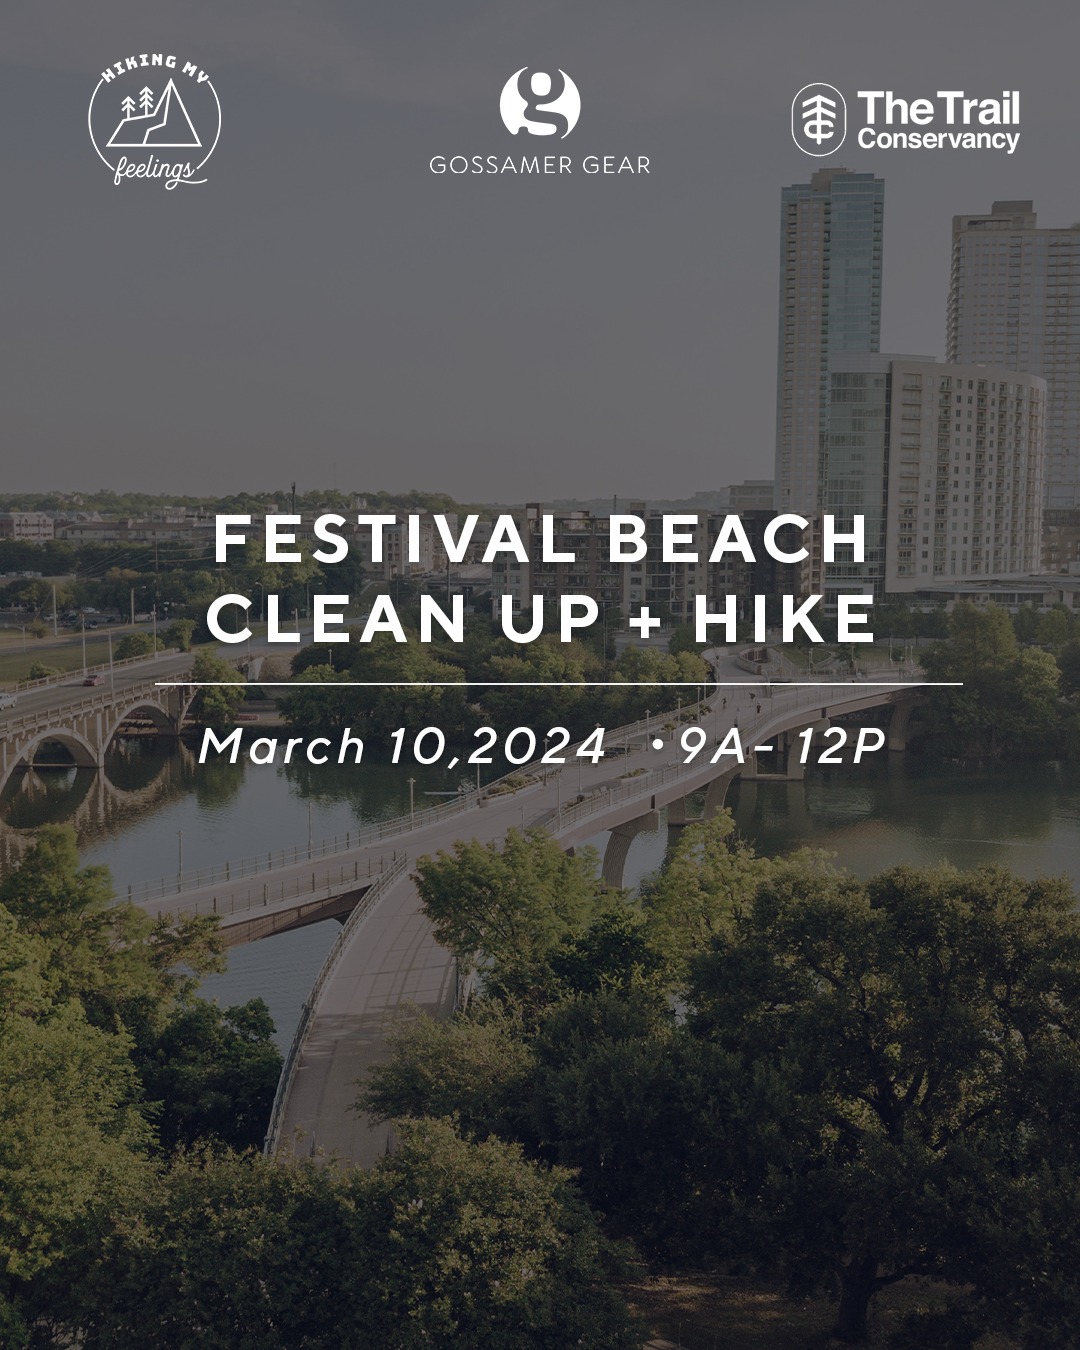 Festival Beach Cleanup and Hike